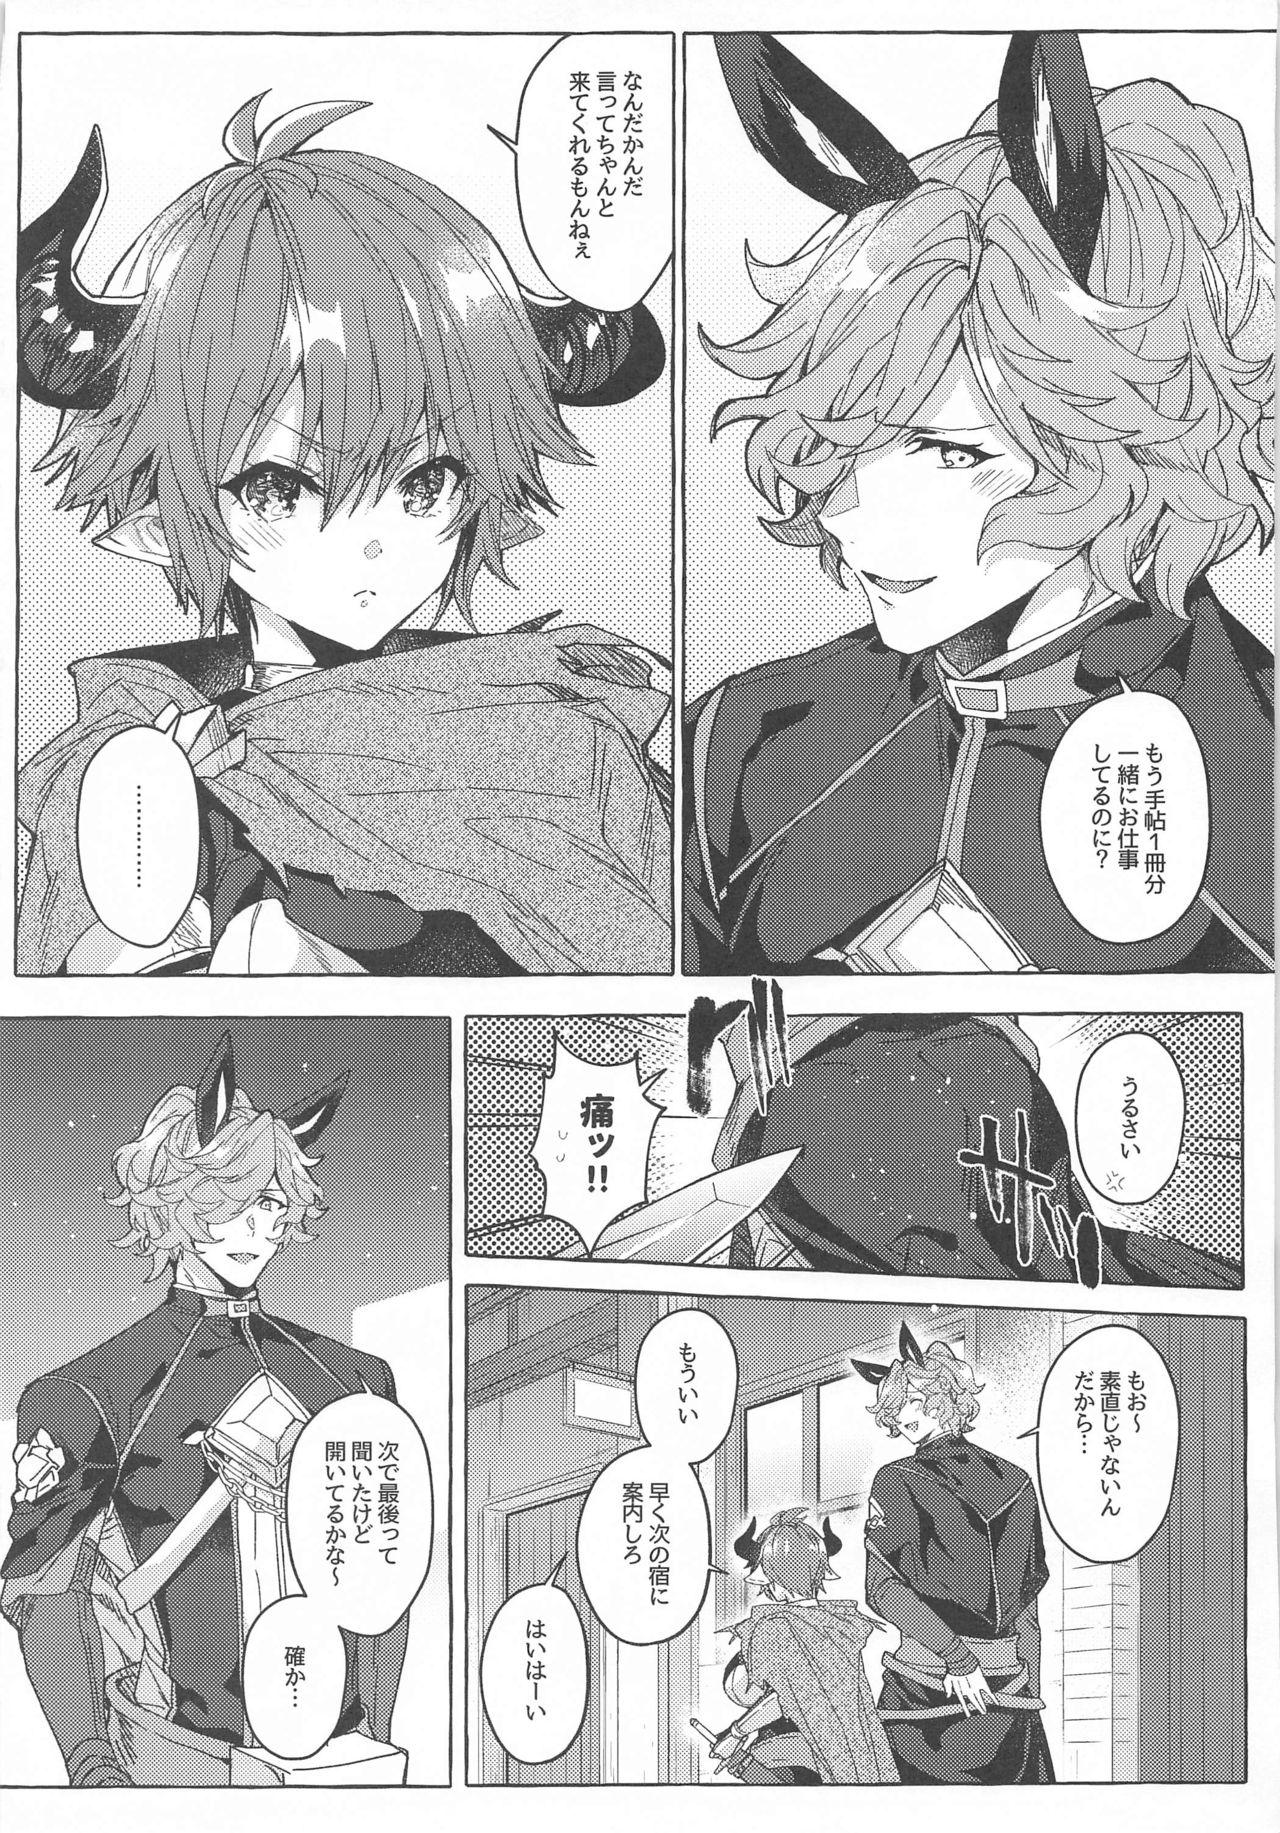 Outside switch - Granblue fantasy Gag - Page 8